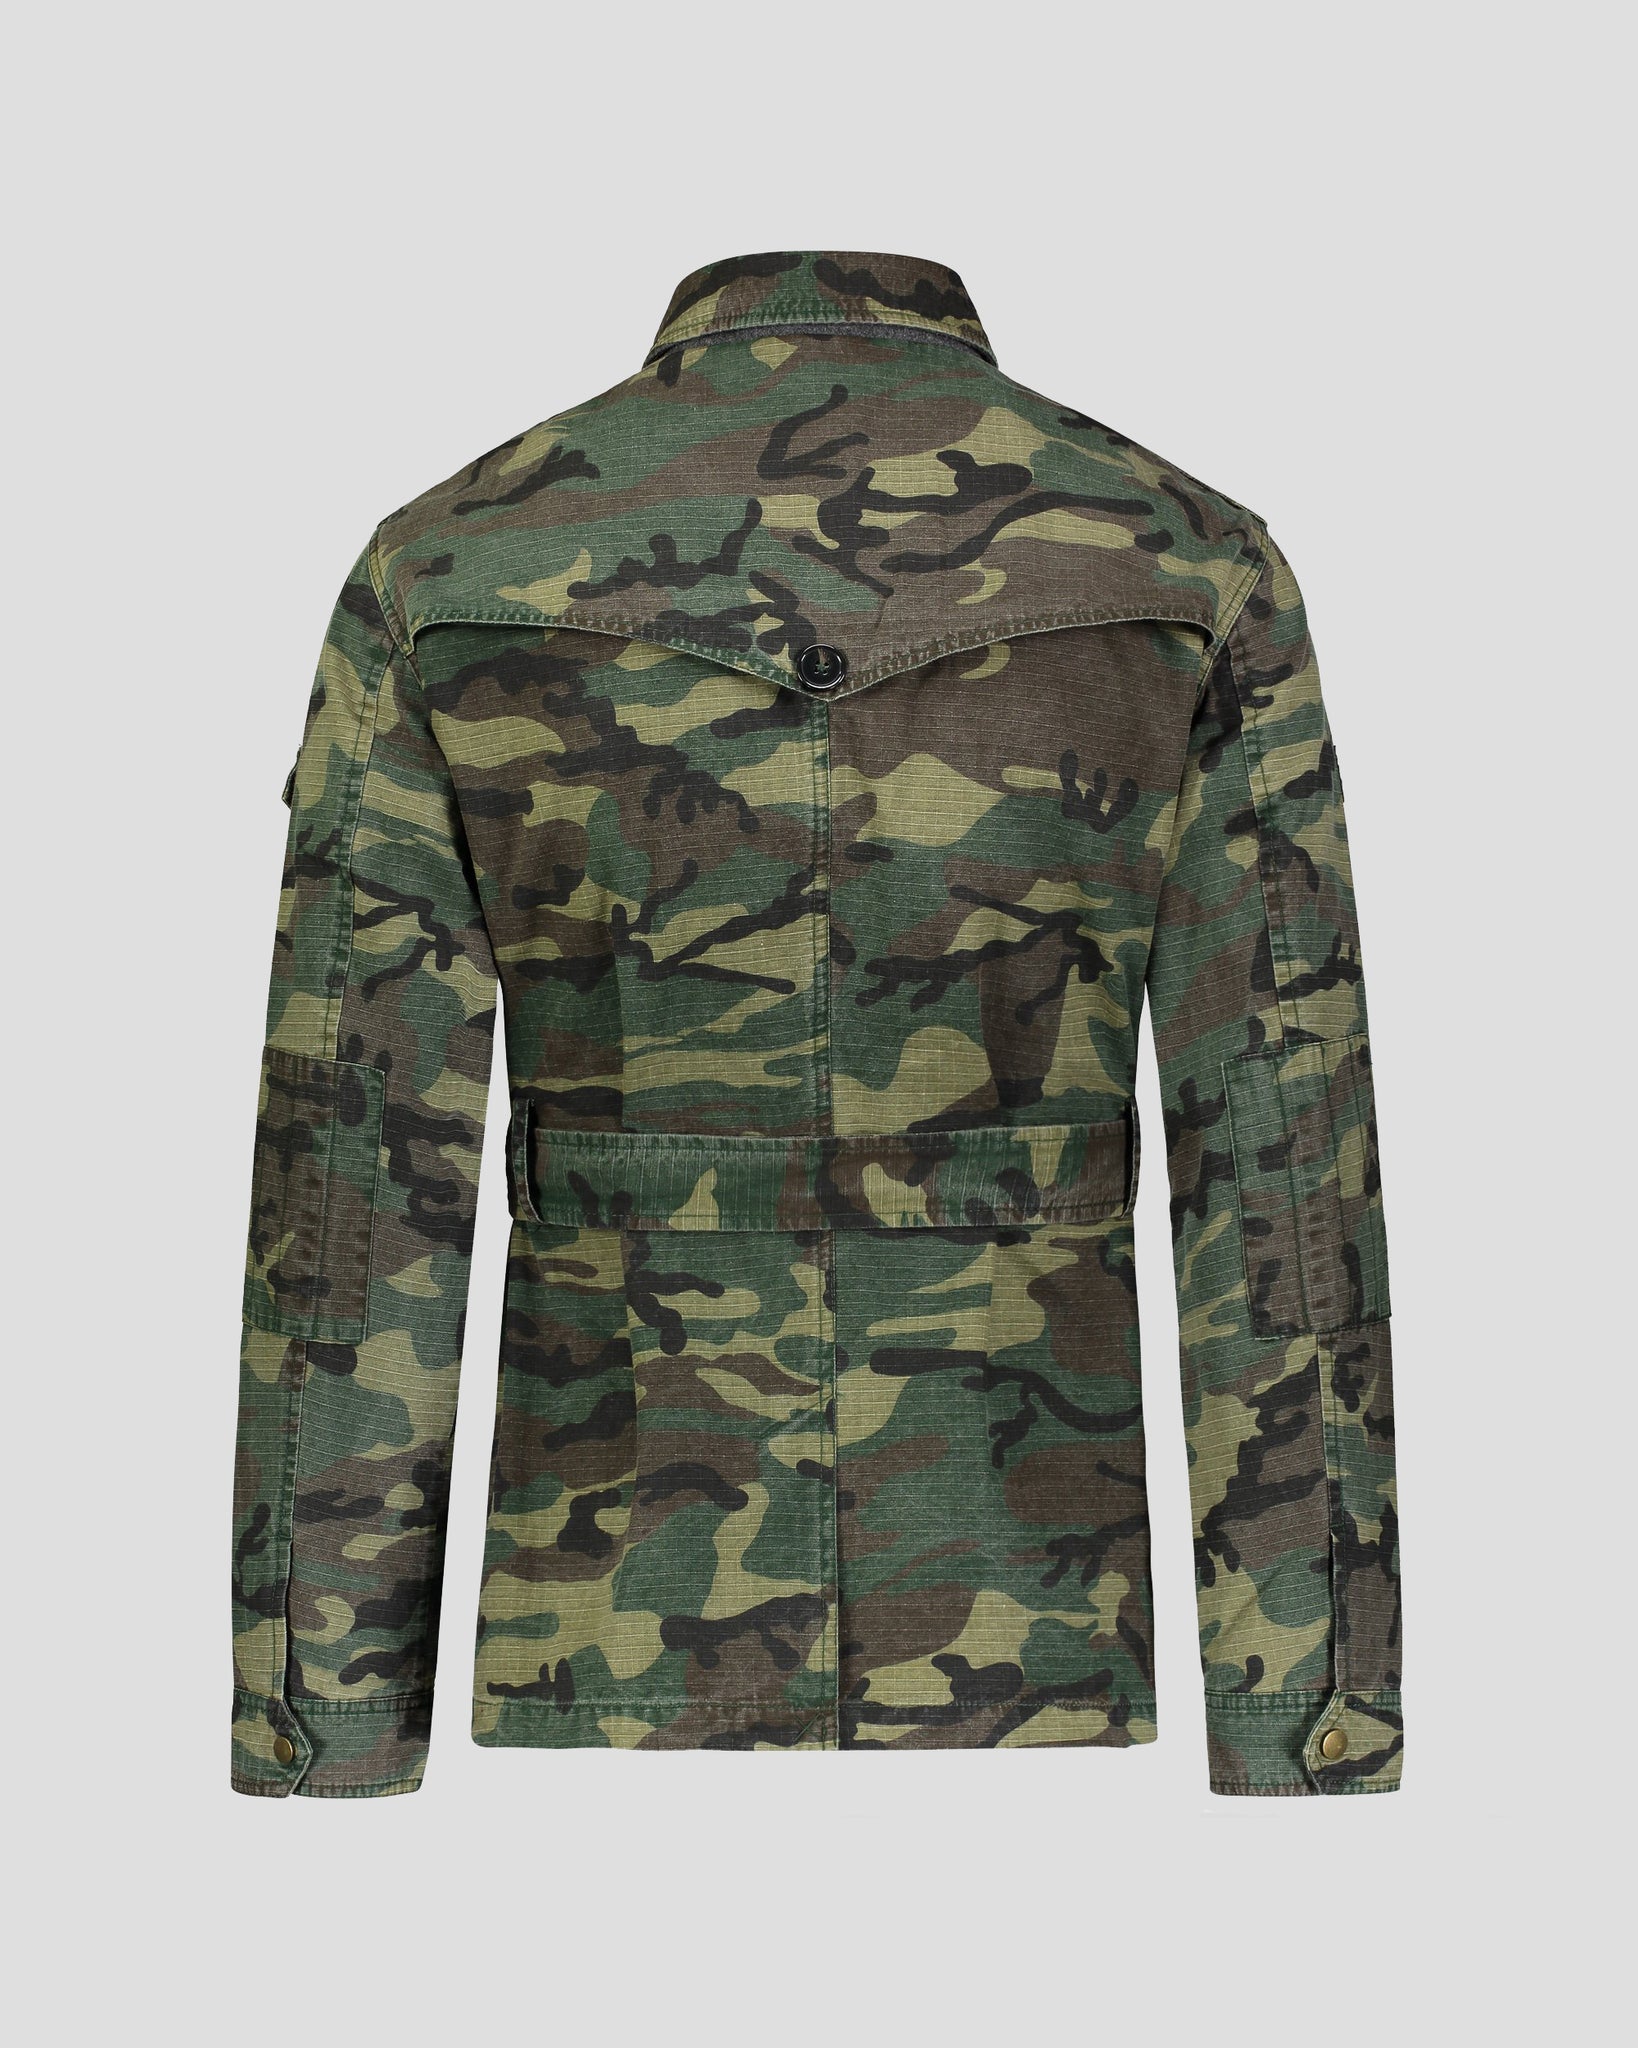 Southern Gents Camouflage Field Jacket 